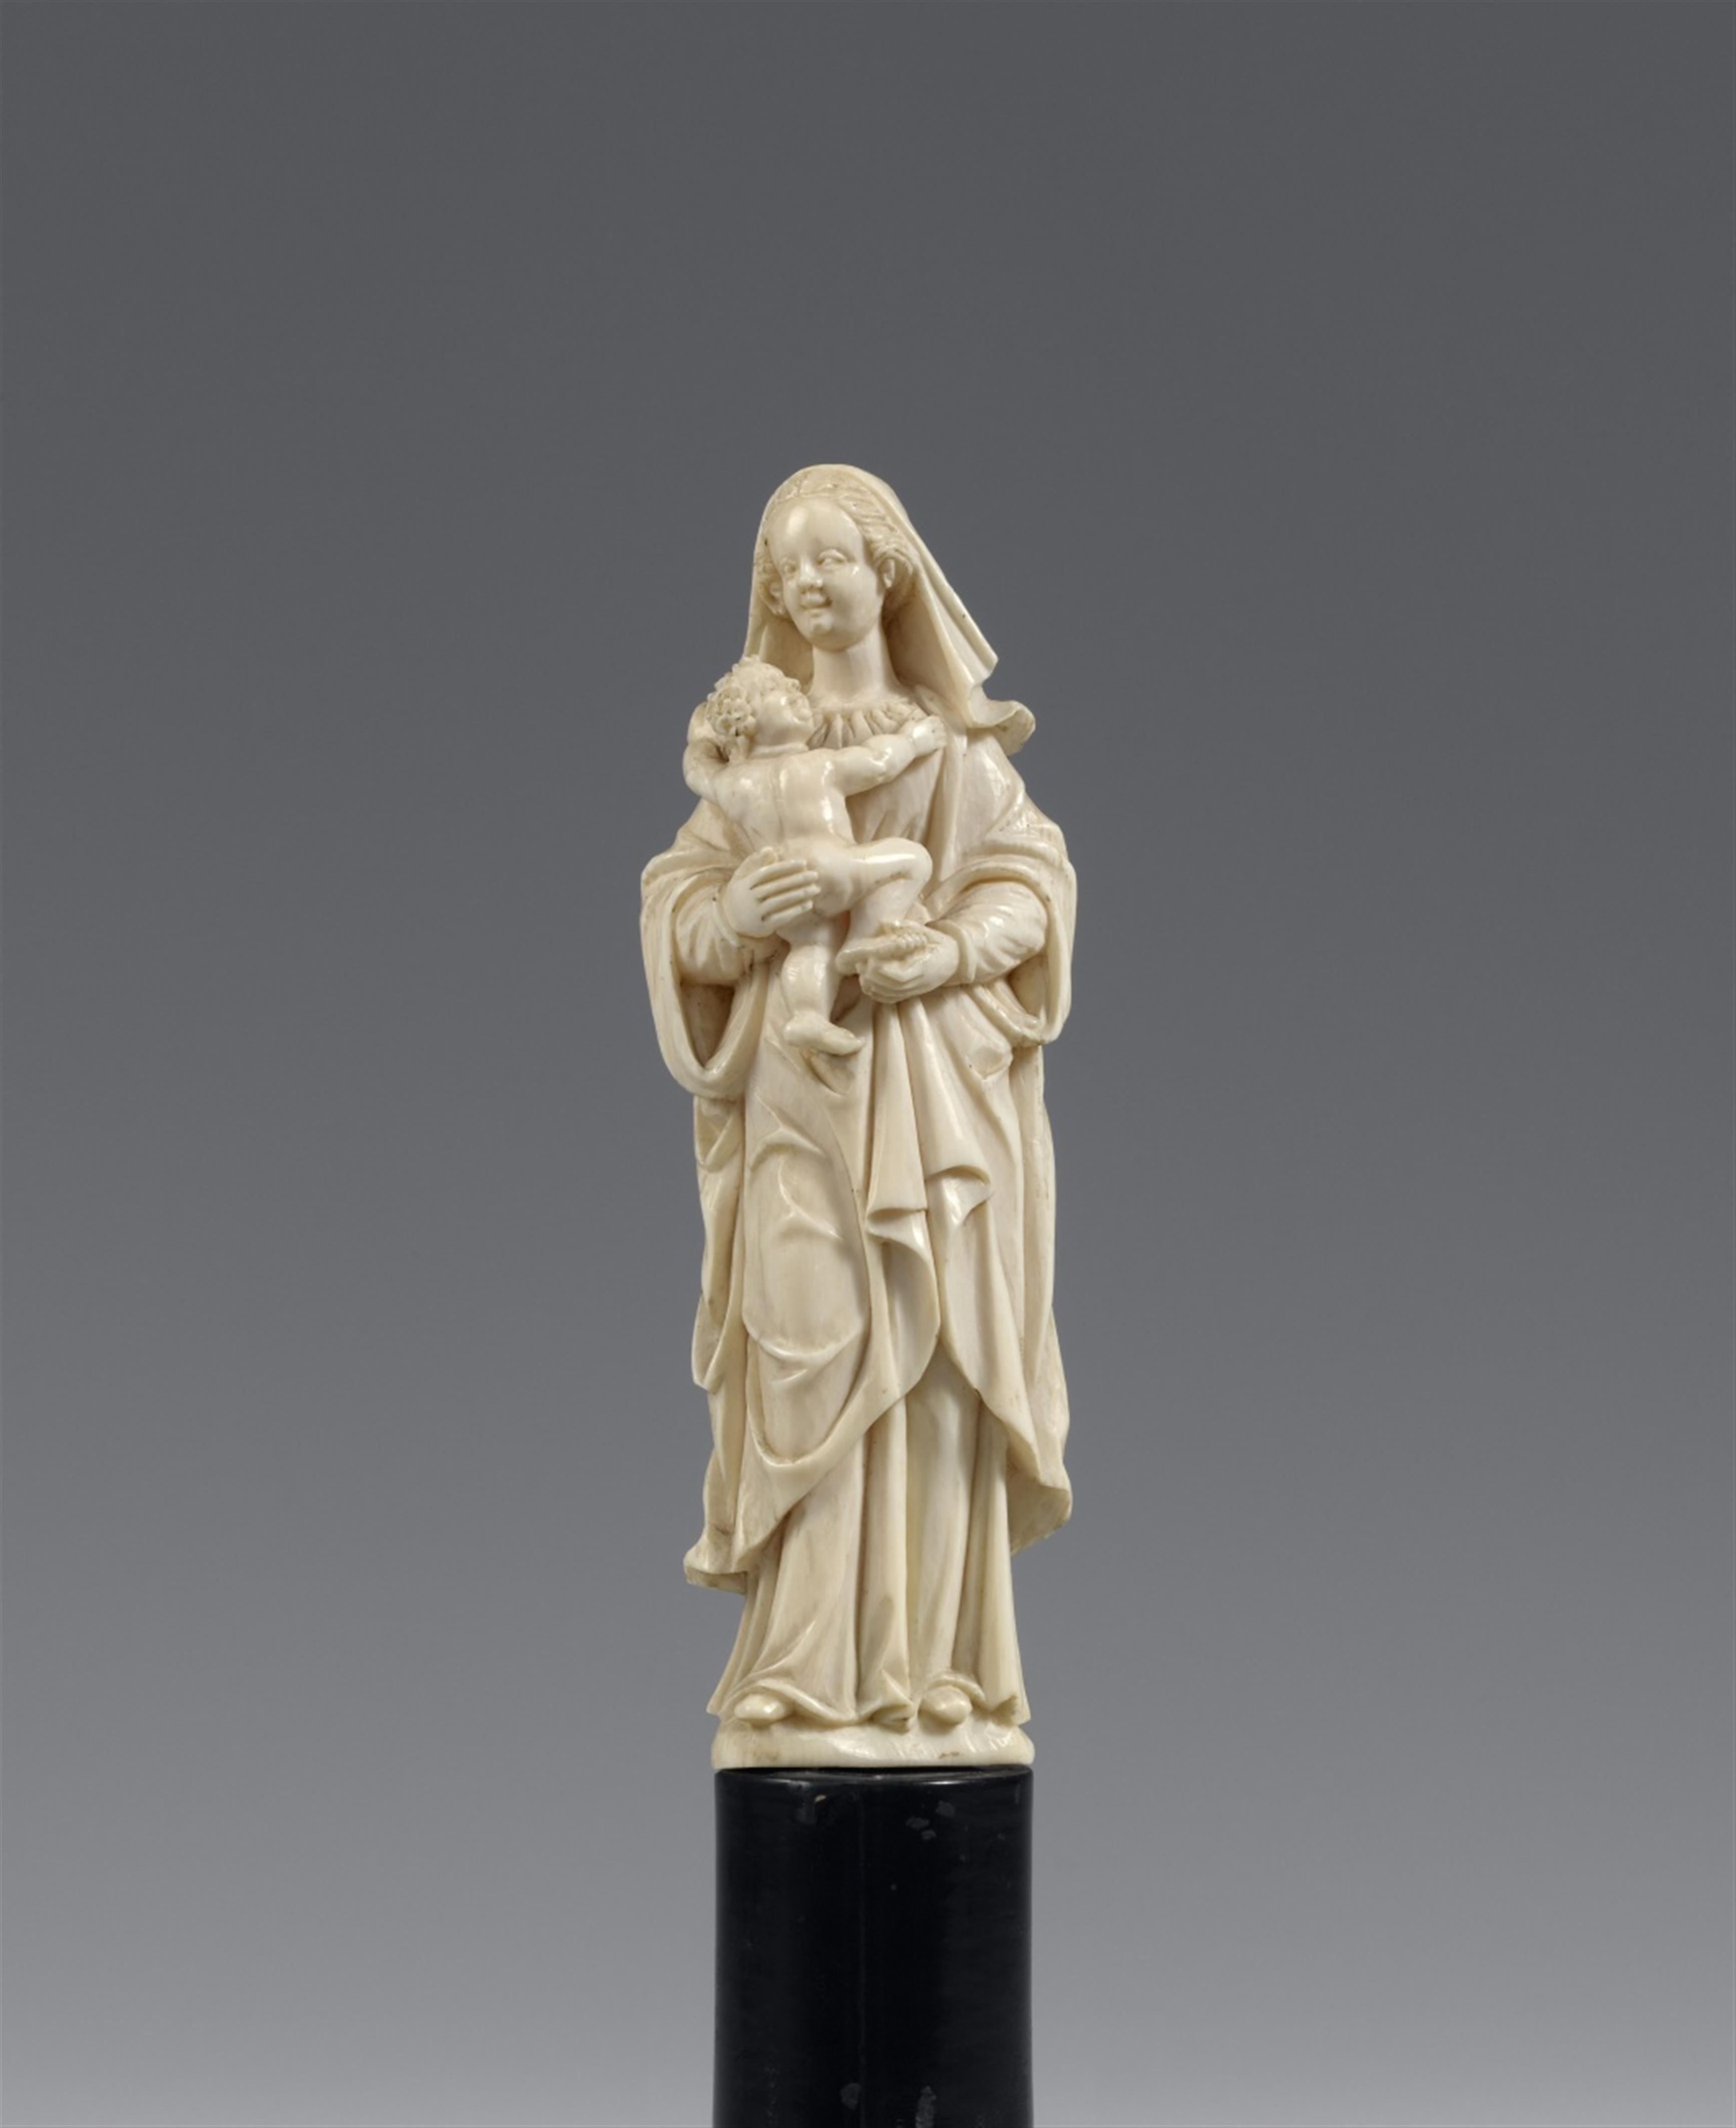 Flemish 2nd half 17th century - A Flemish ivory figure of the Virgin and Child, second half 17th century - image-1